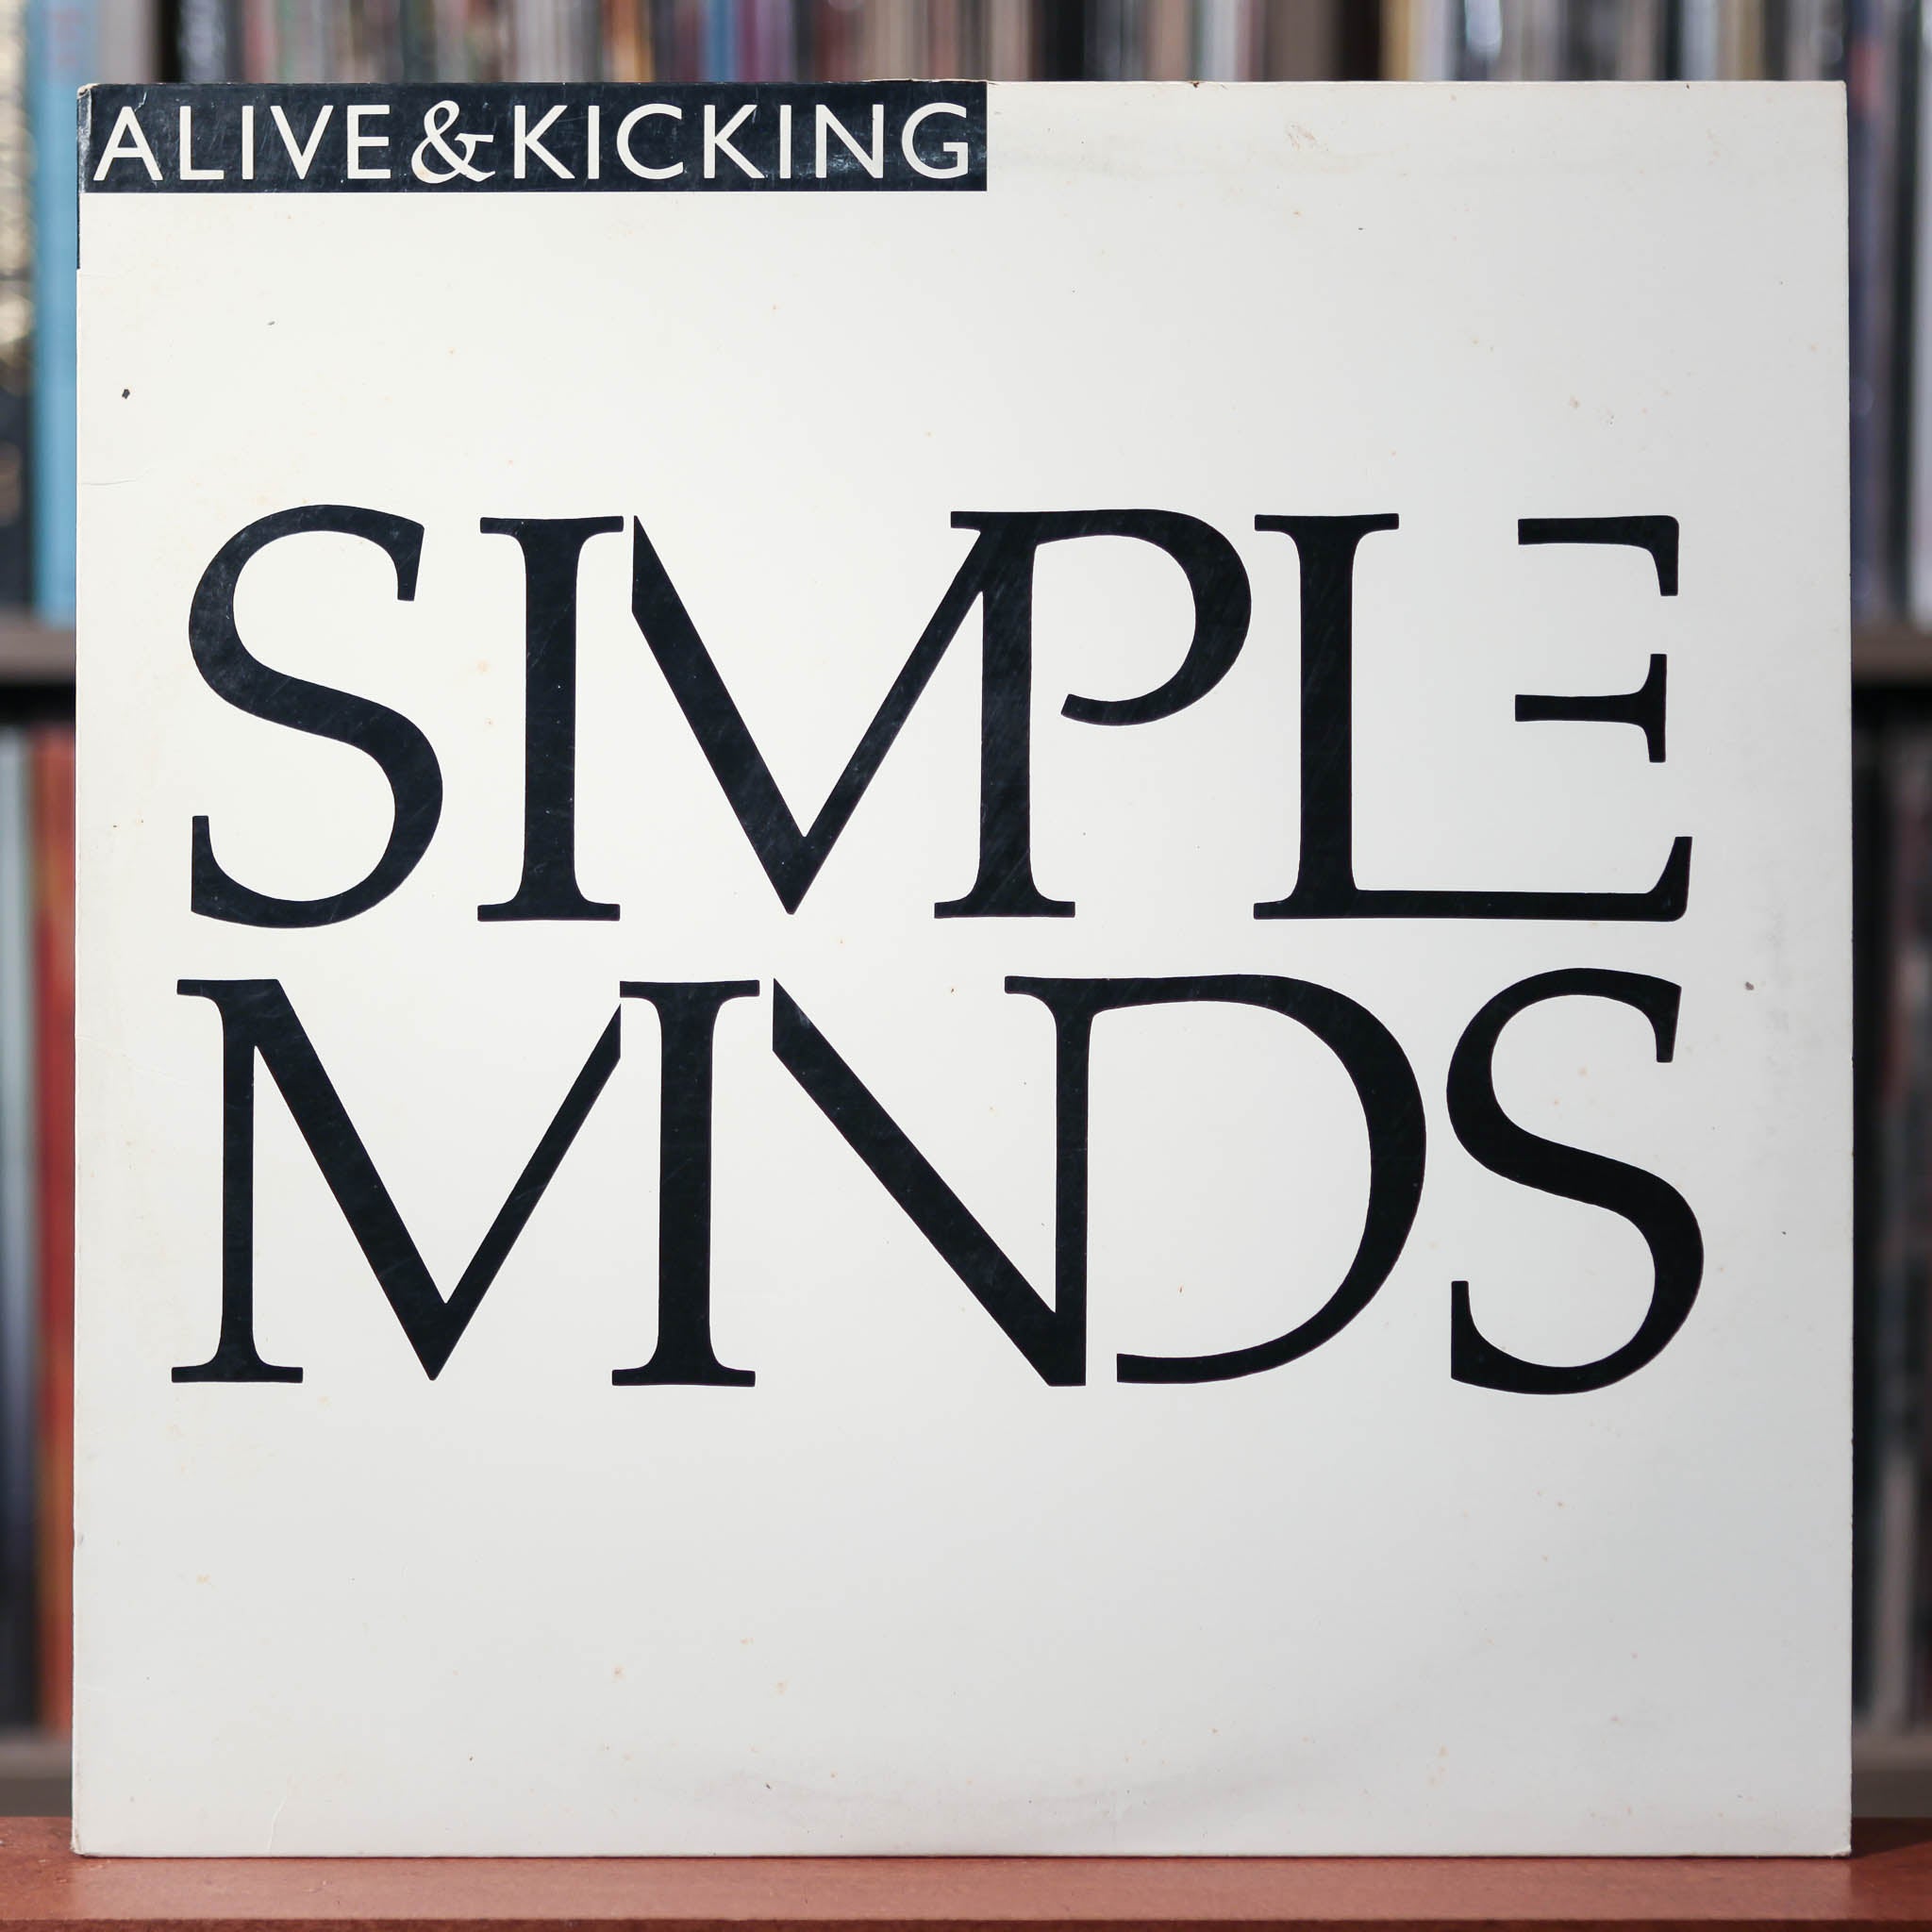 Simple Minds  On A&M Records